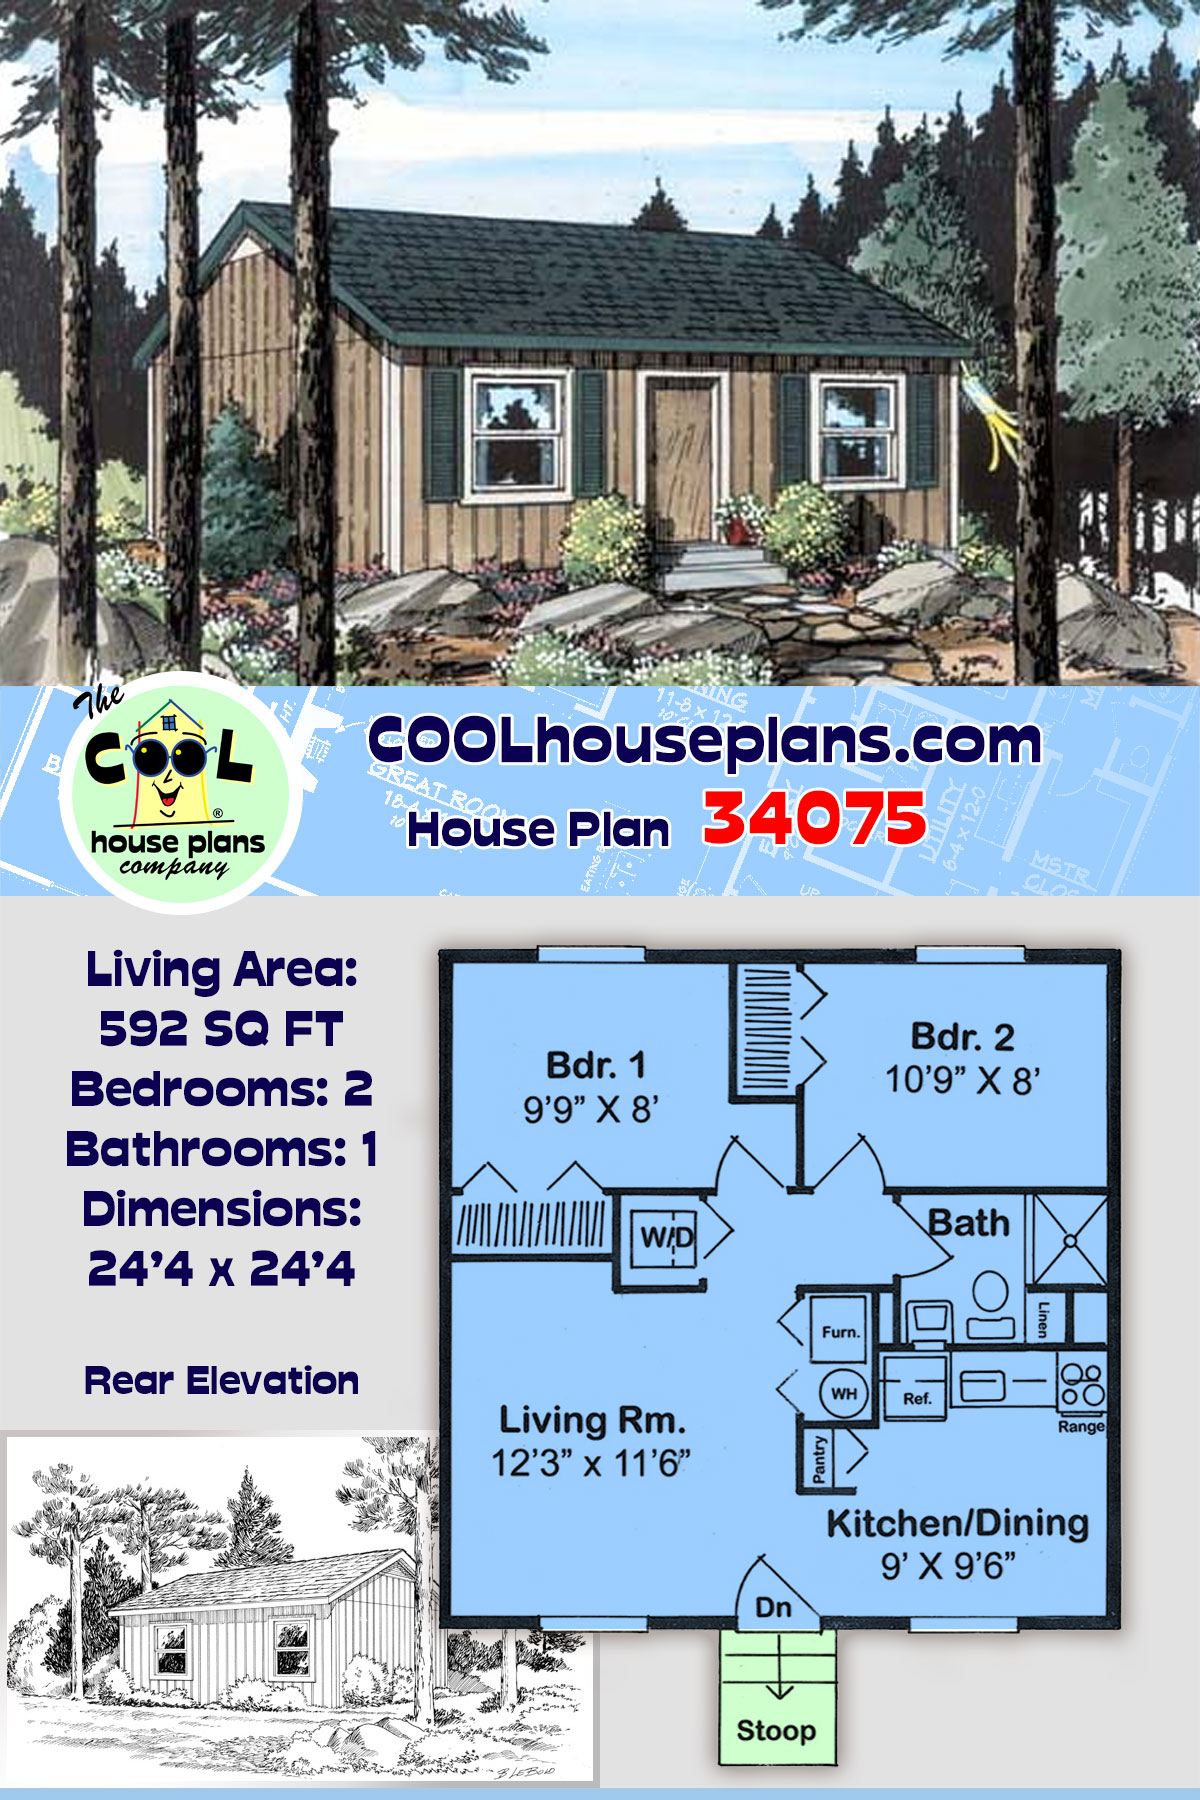 Cabin, Cottage, Traditional House Plan 34075 with 2 Beds, 1 Baths